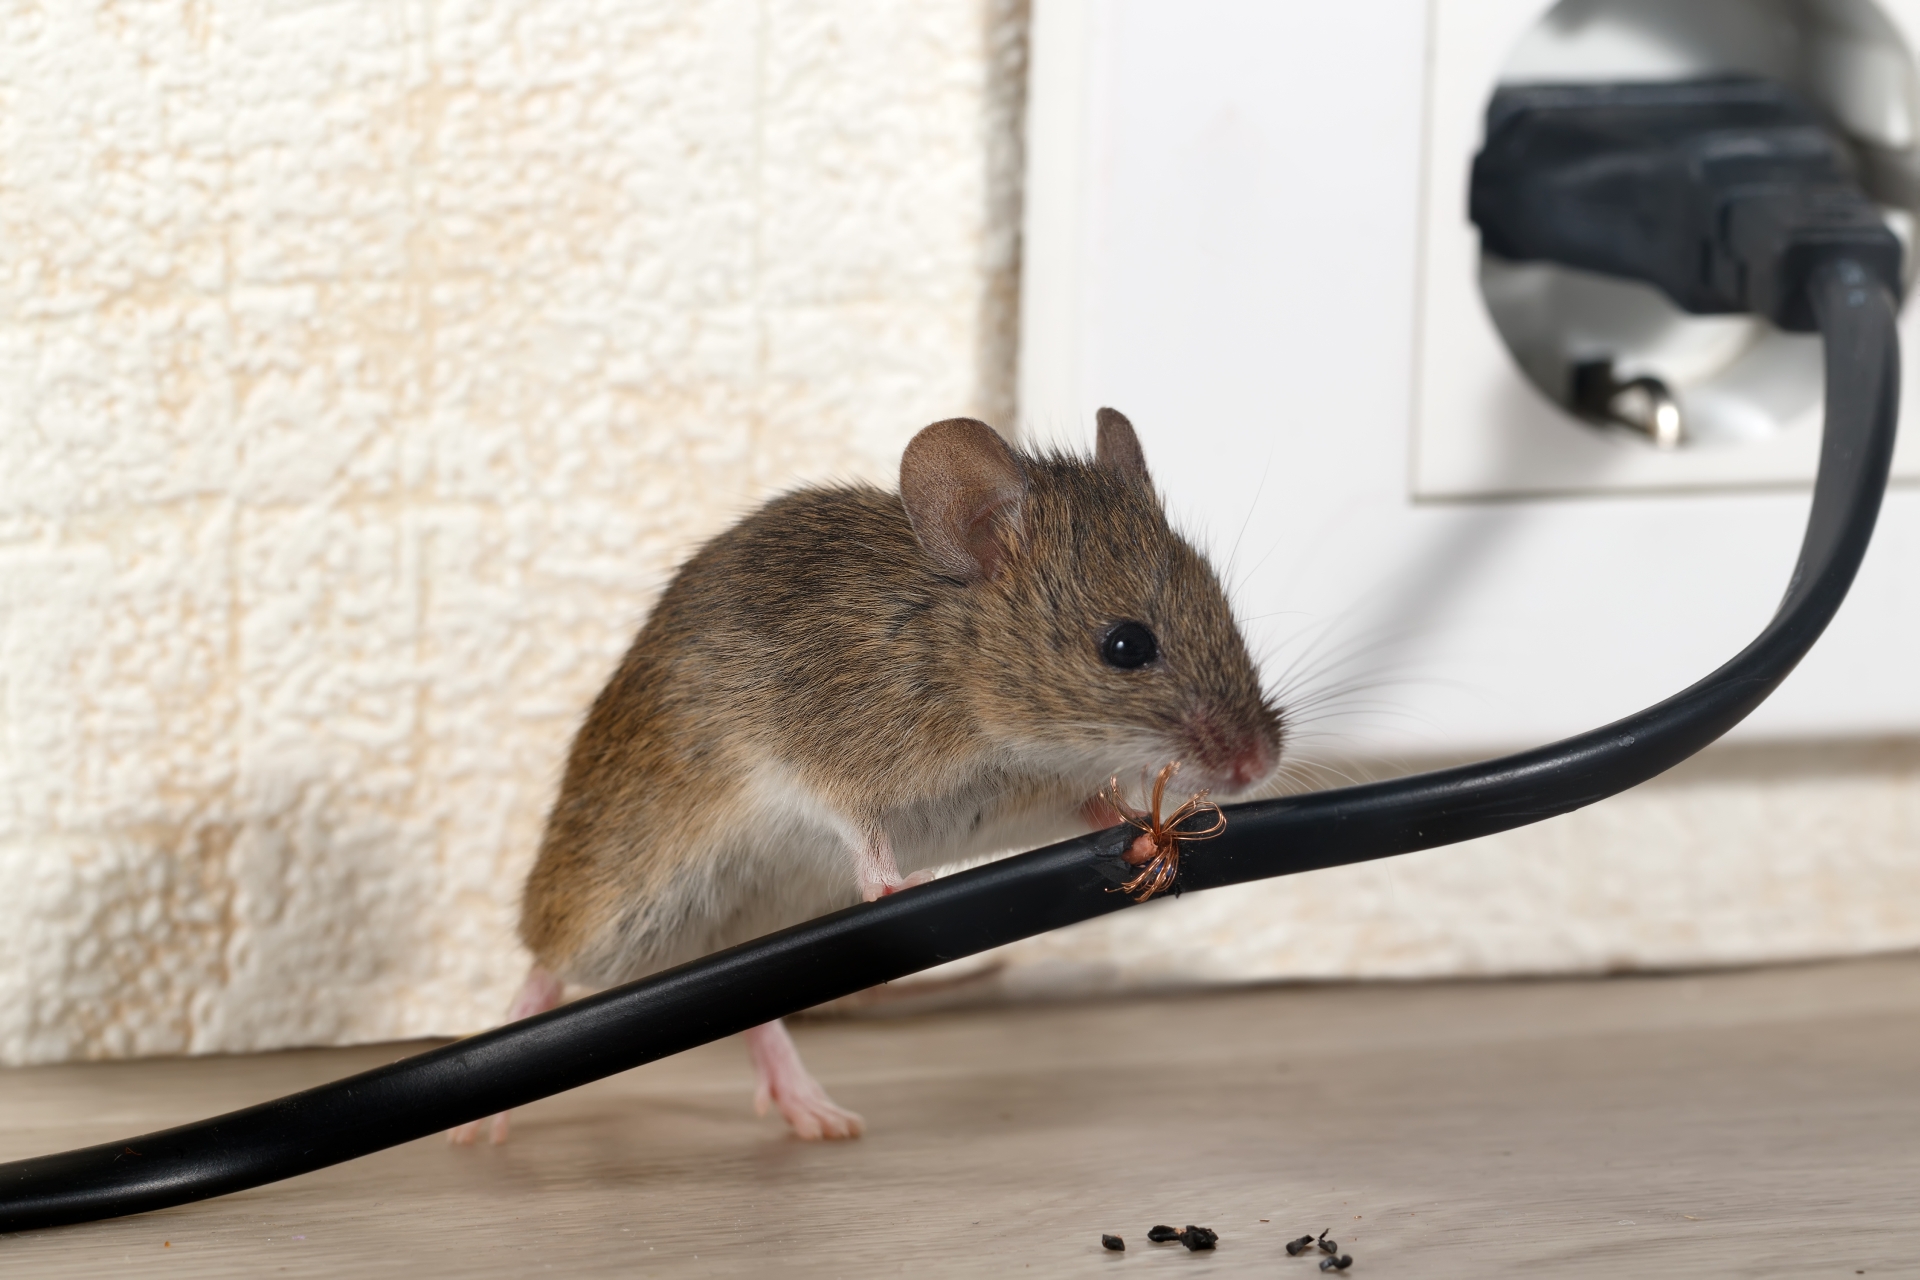 Mice Infestation, Pest Control in Holland Park, W11. Call Now 020 8166 9746